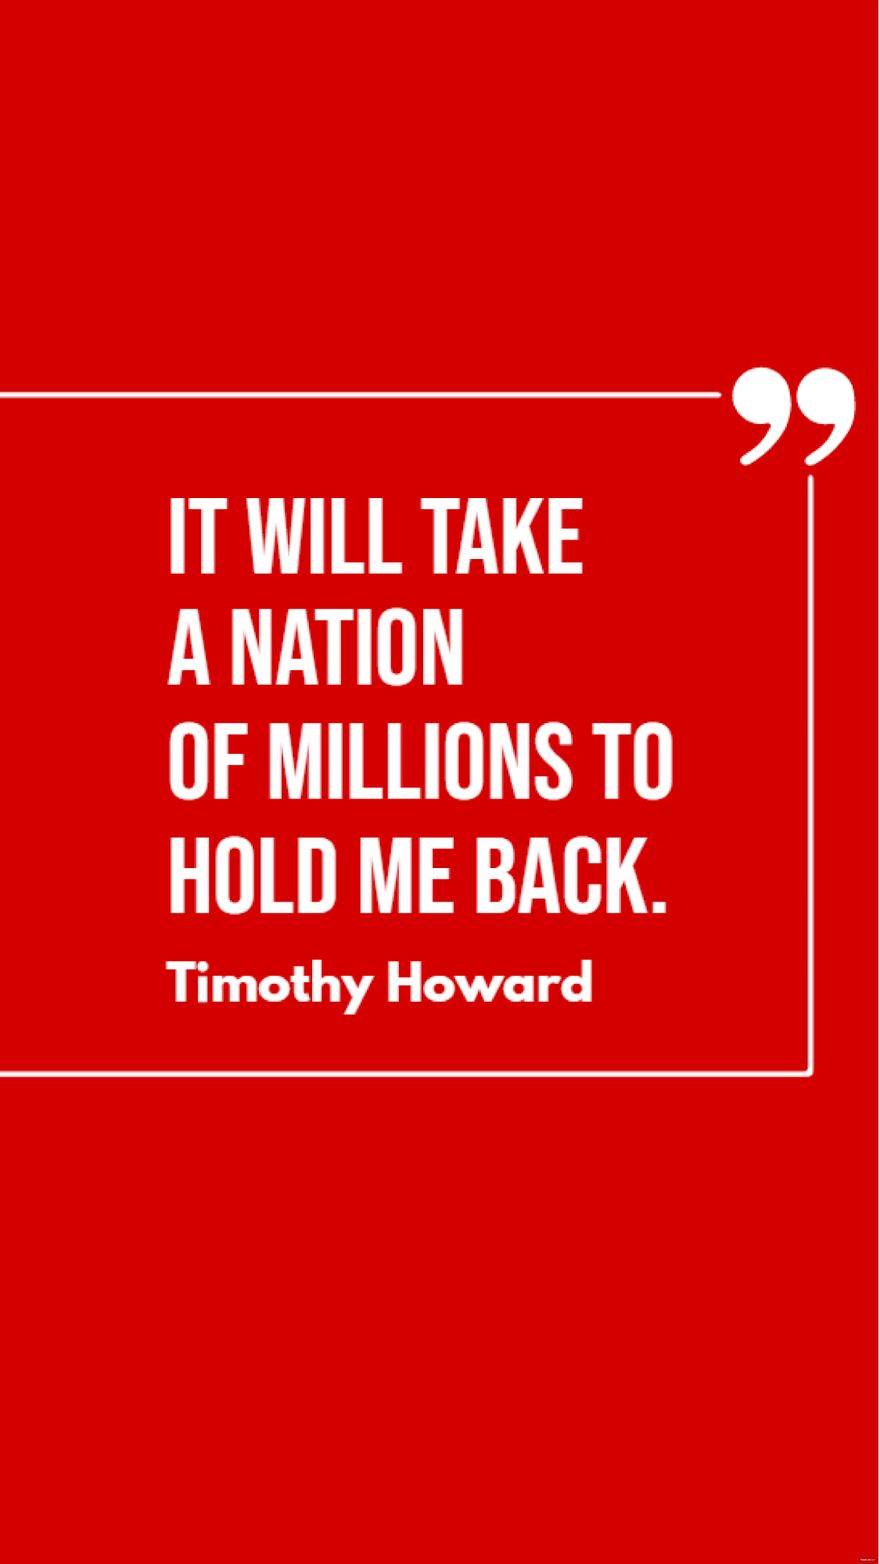 Free Timothy Howard - It will take a nation of millions to hold me back. in JPG